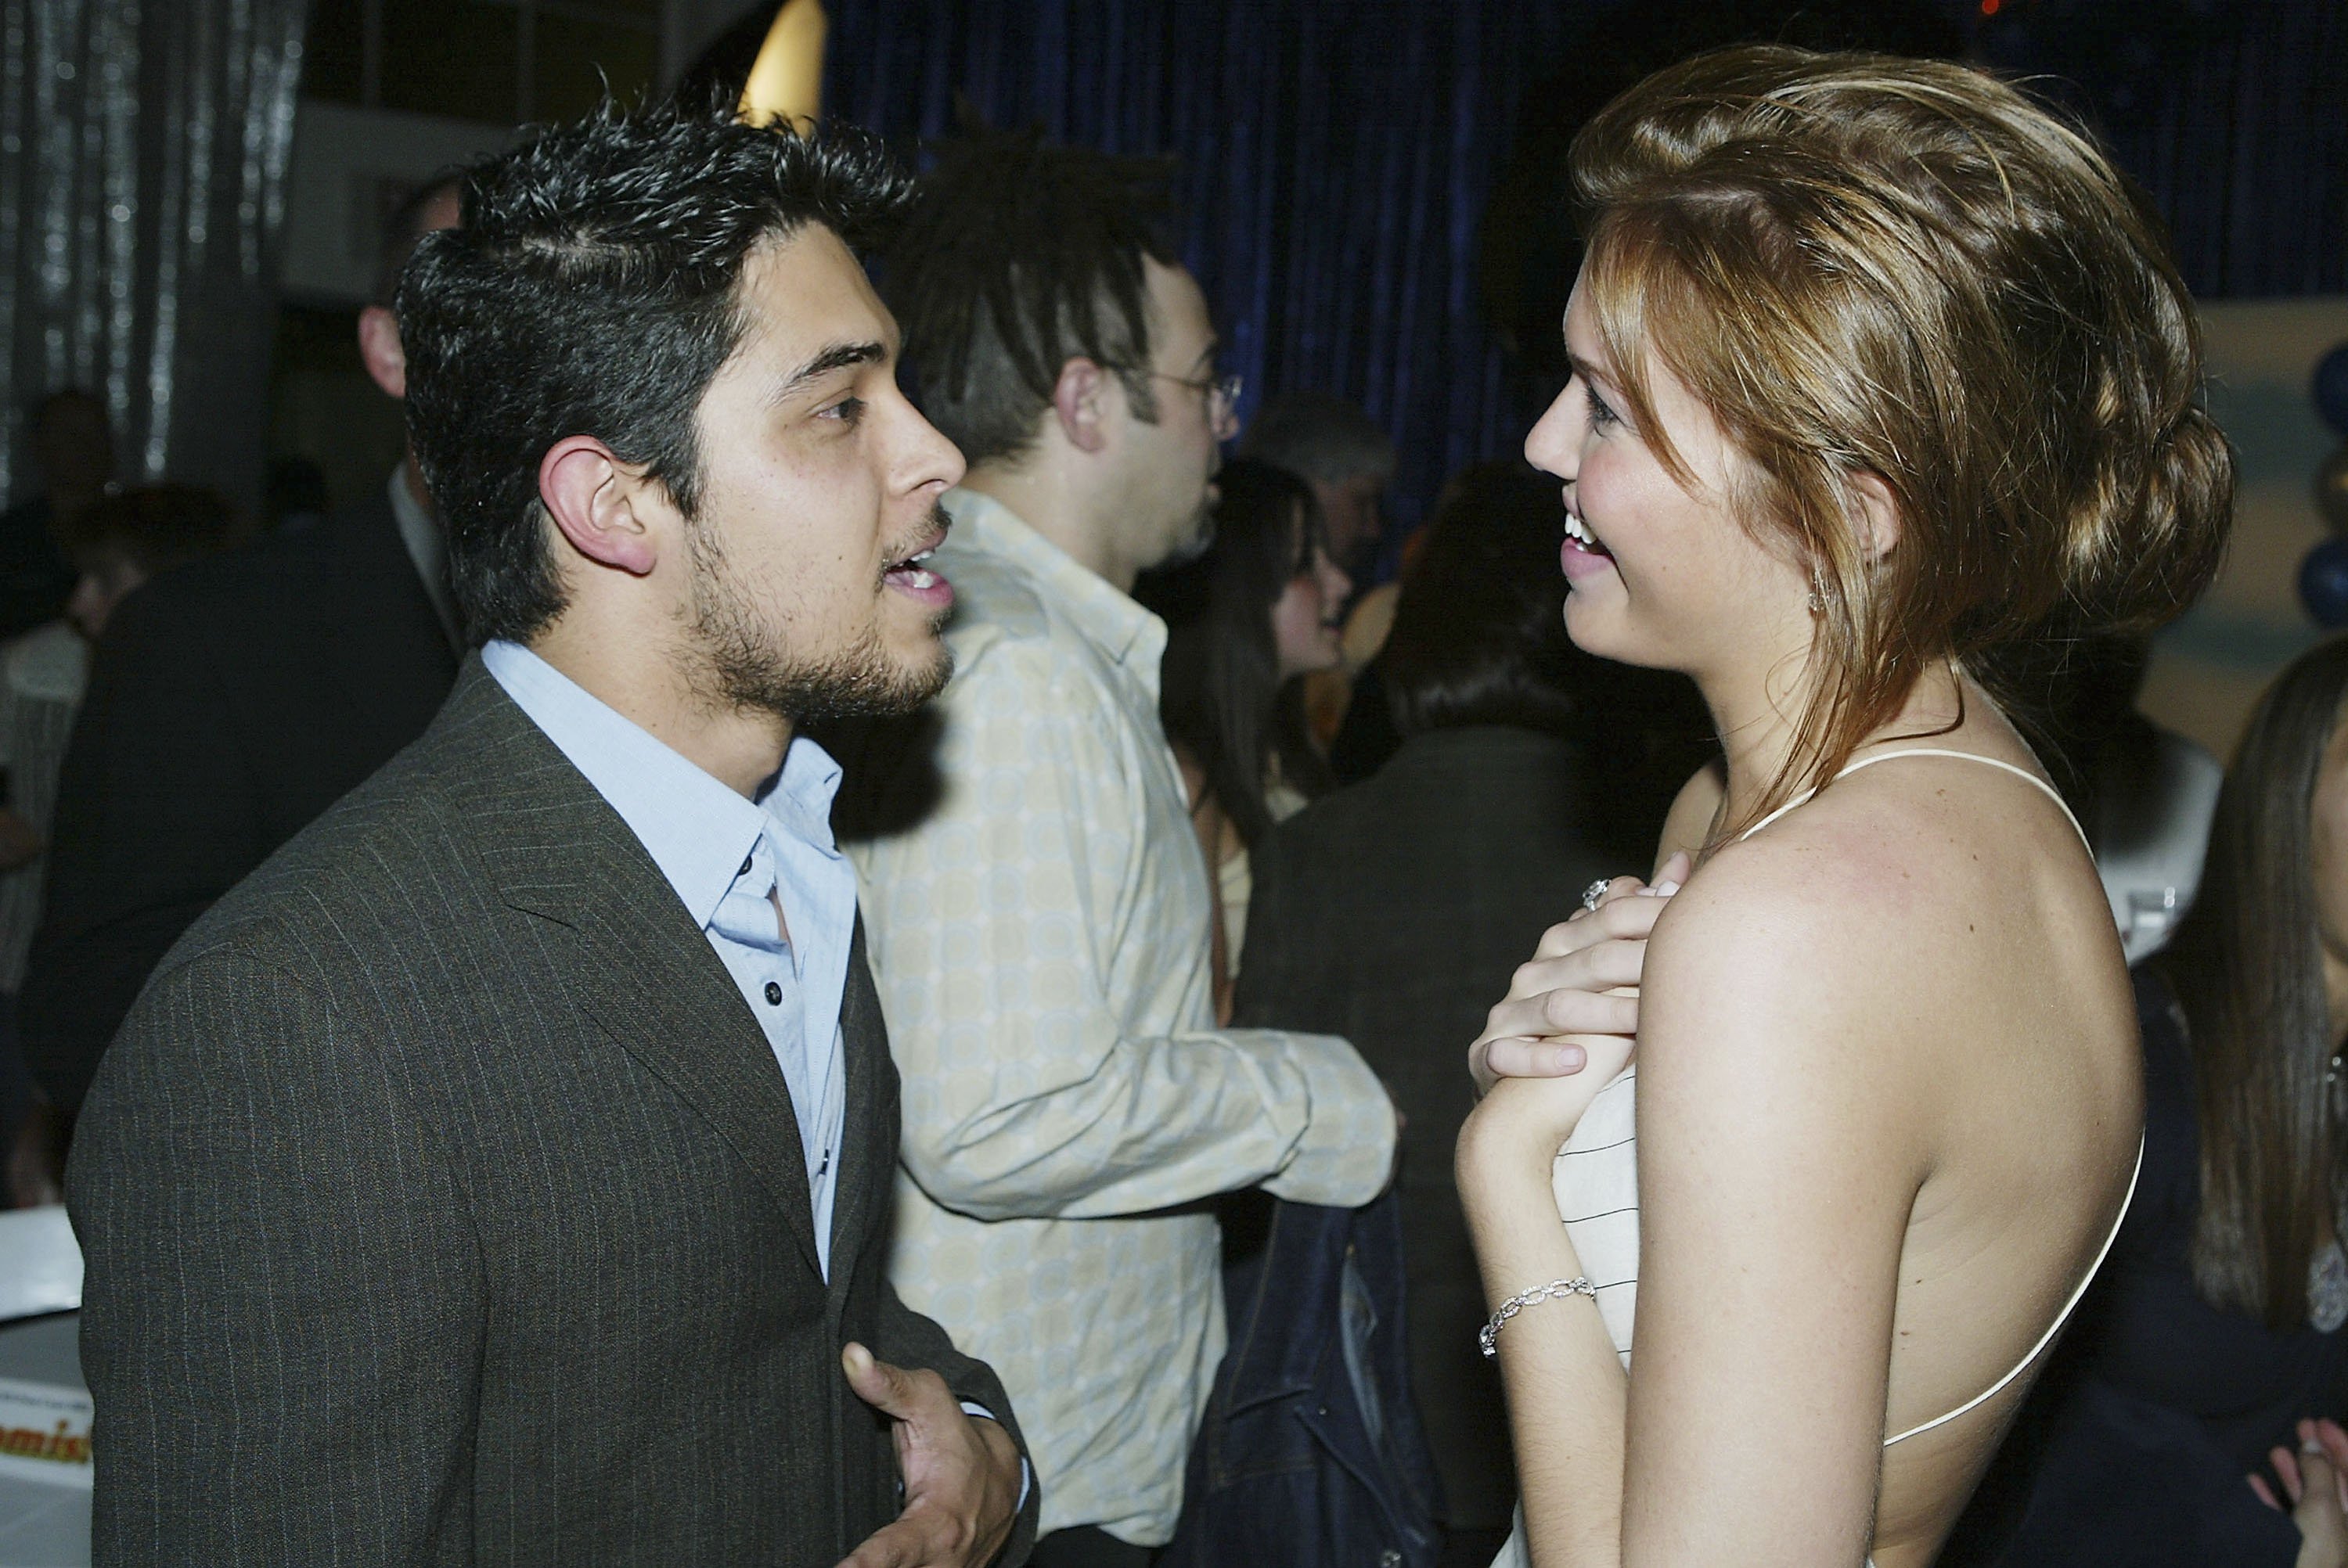 Wilmer Valderrama and Mandy Moore talk at the after-party for United Artists' "Saved" at the Beverly Hills Community Sports Center | Source: Getty Images